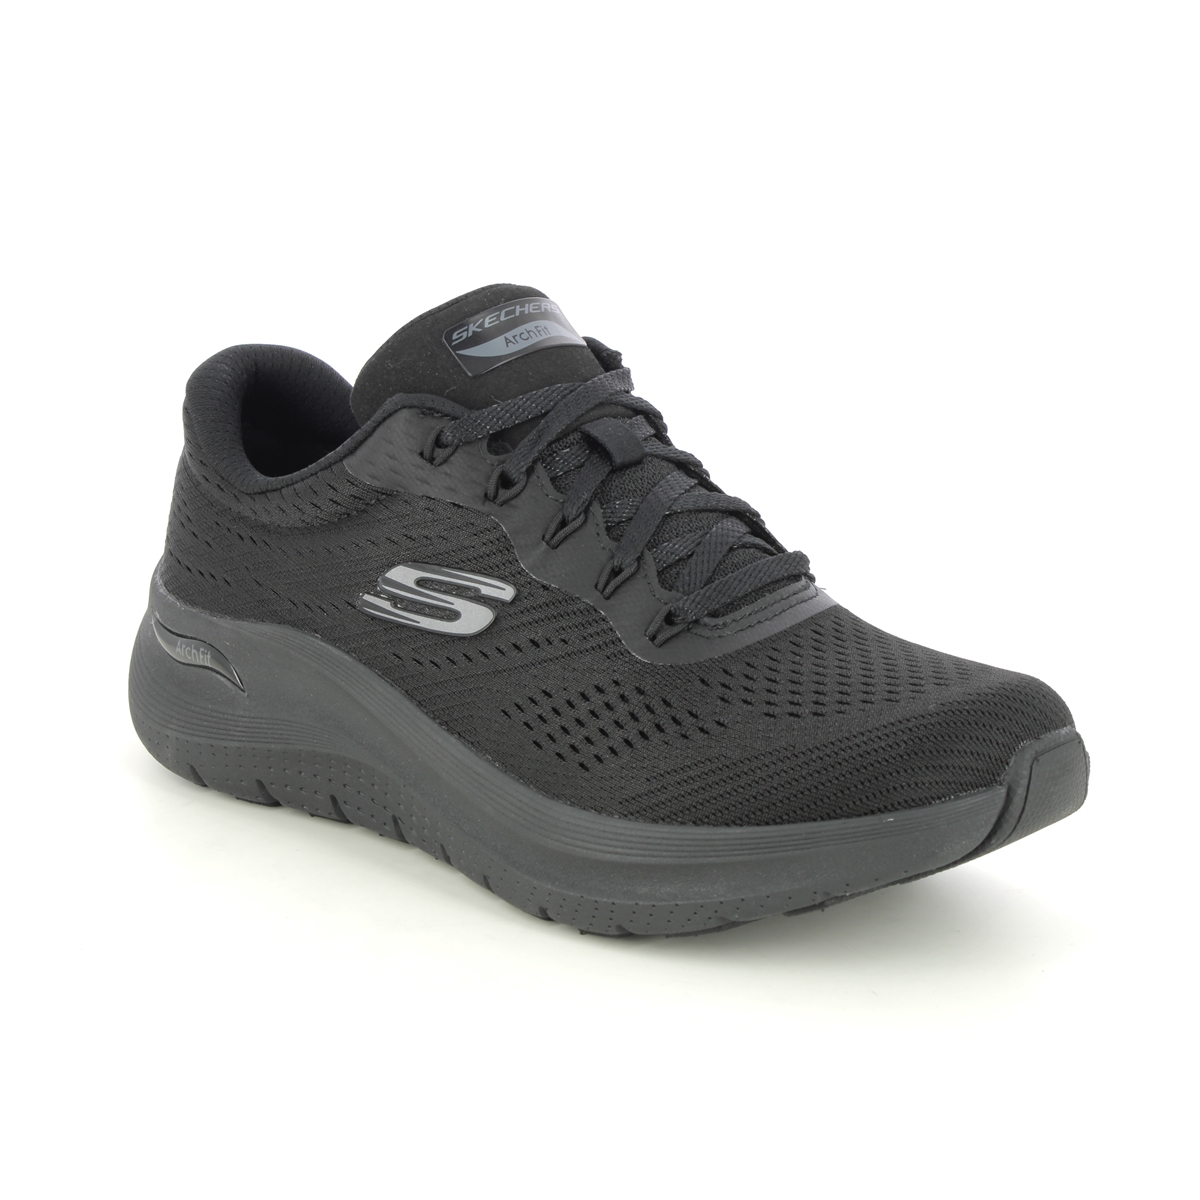 Skechers Arch Fit 2 Lace BBK Black Womens trainers 150051 in a Plain Textile in Size 4.5